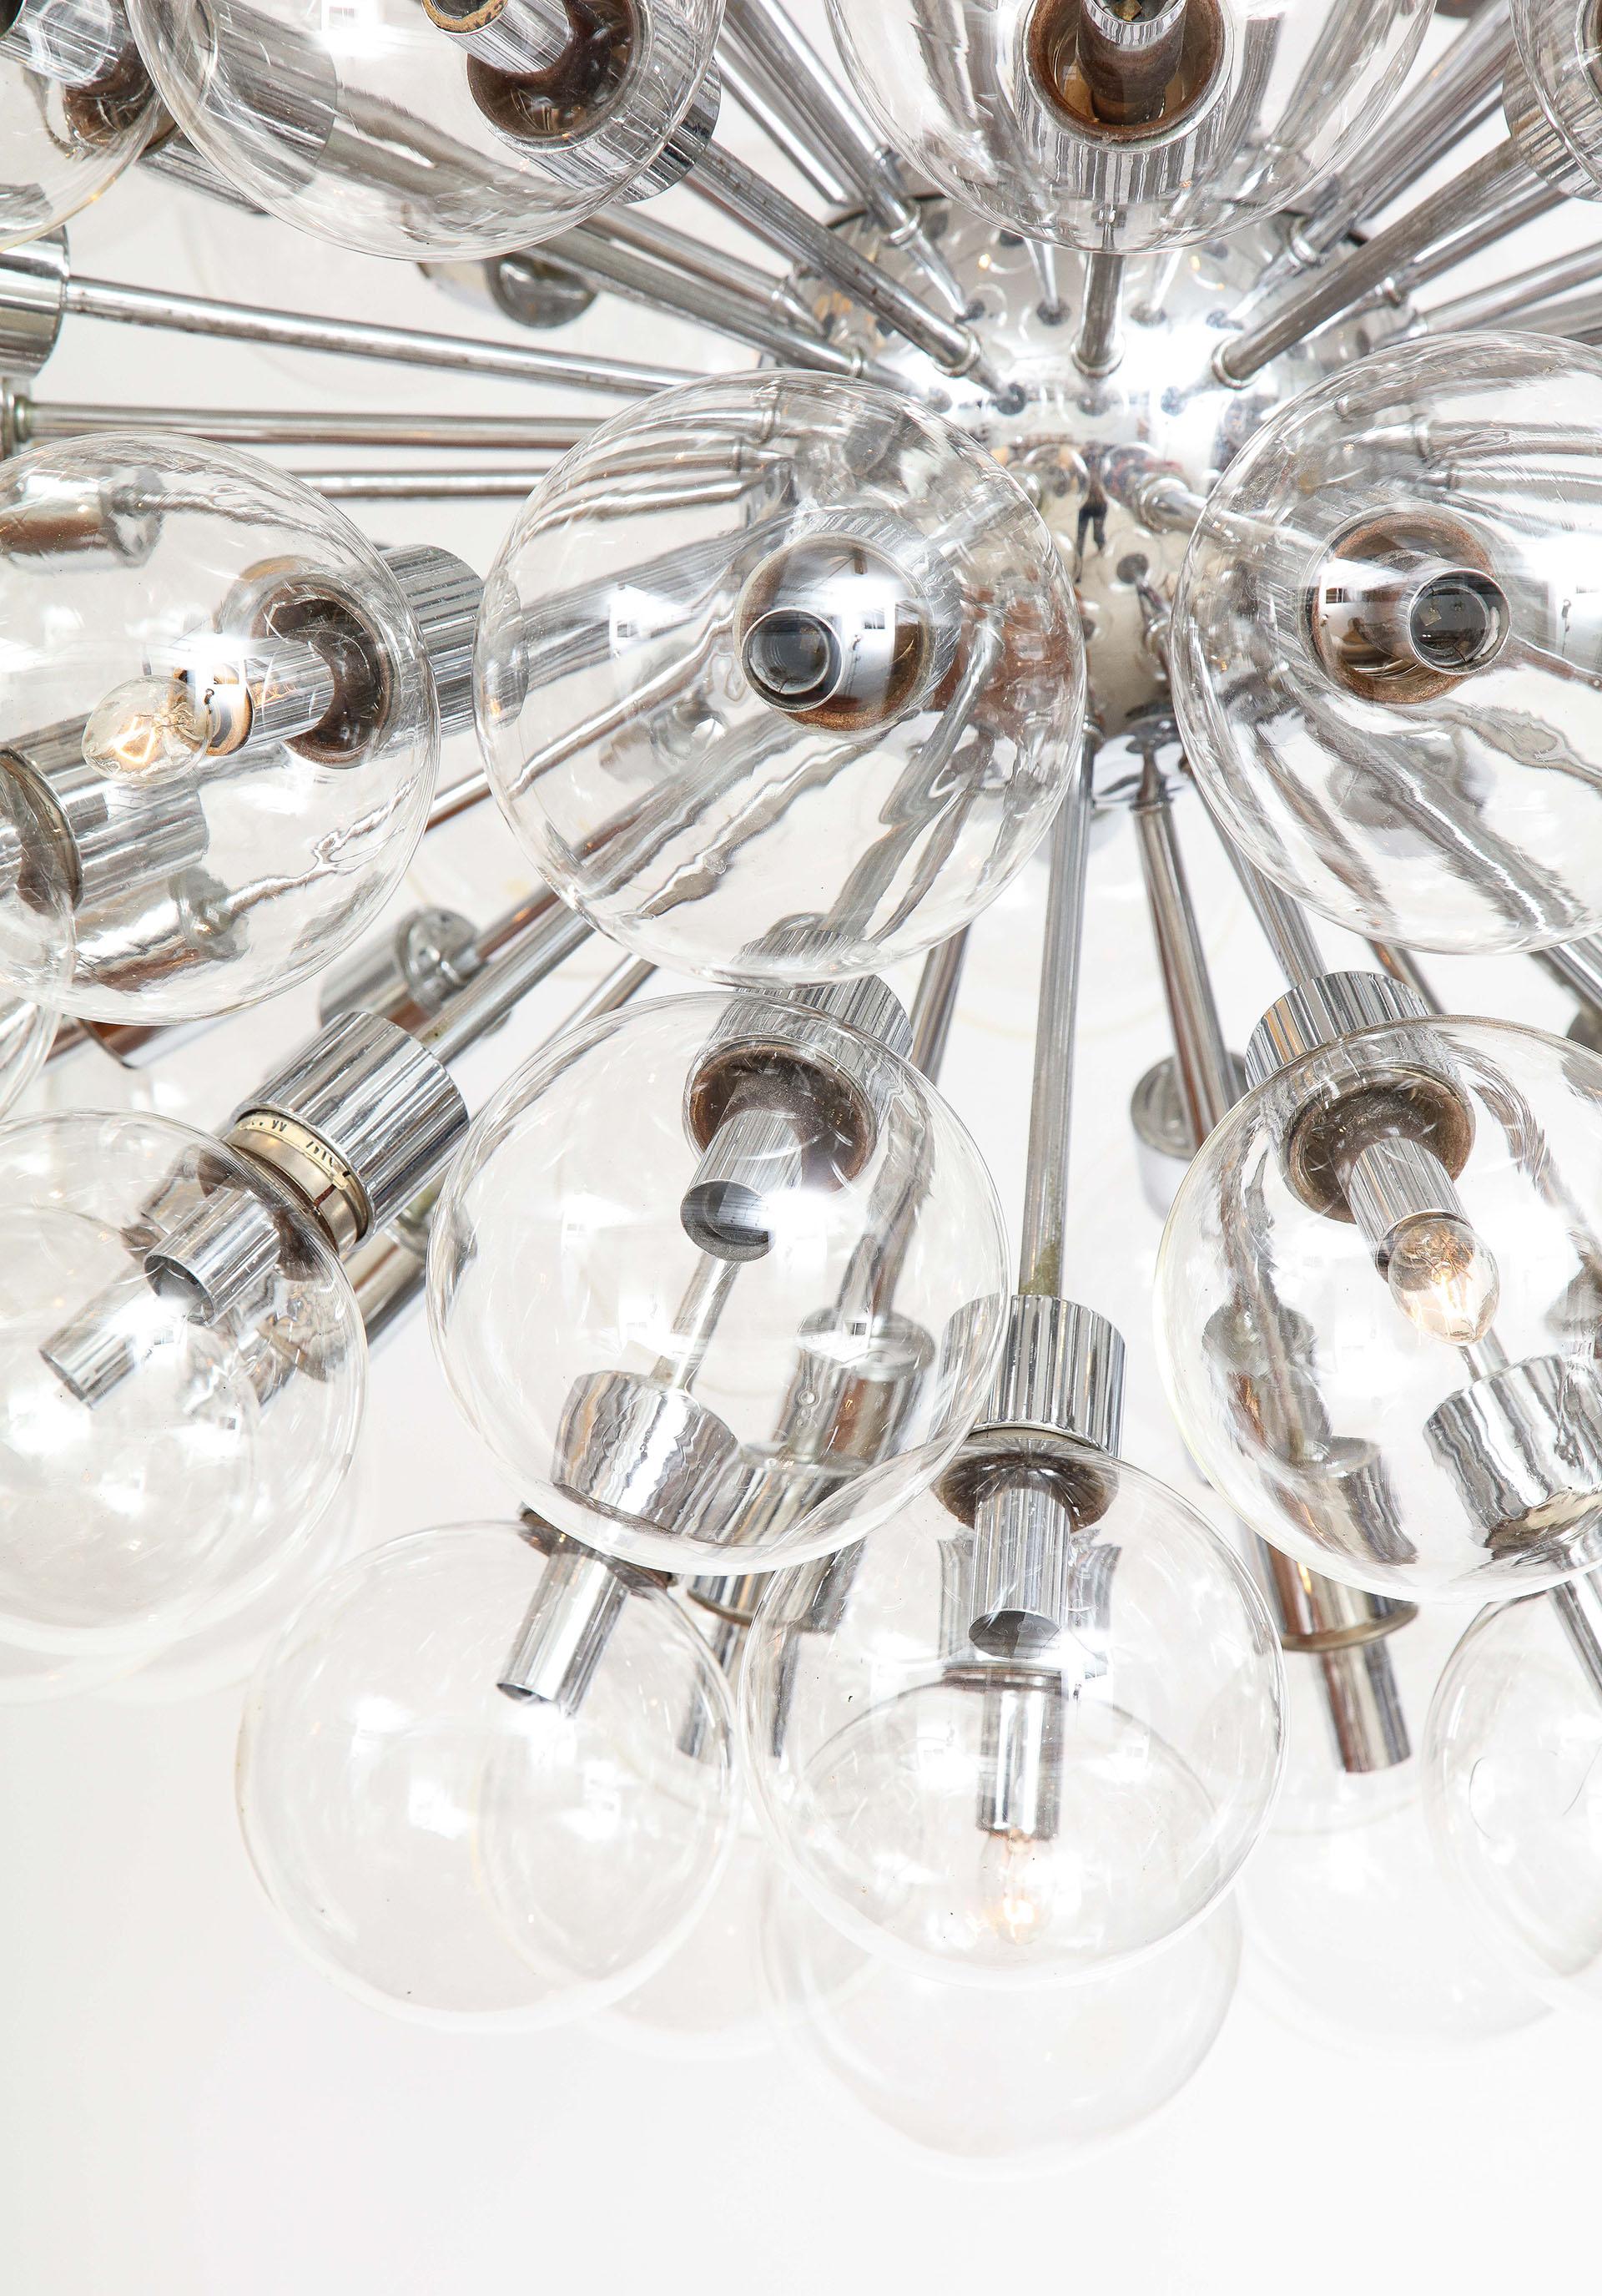 The pair of Mid-Century Modernist monumental polished chrome Sputnik chandeliers, each having 75 spherical clear blown glass globes. Design by Motoko Ishii & Manufactured by Staff Leuchten.
 